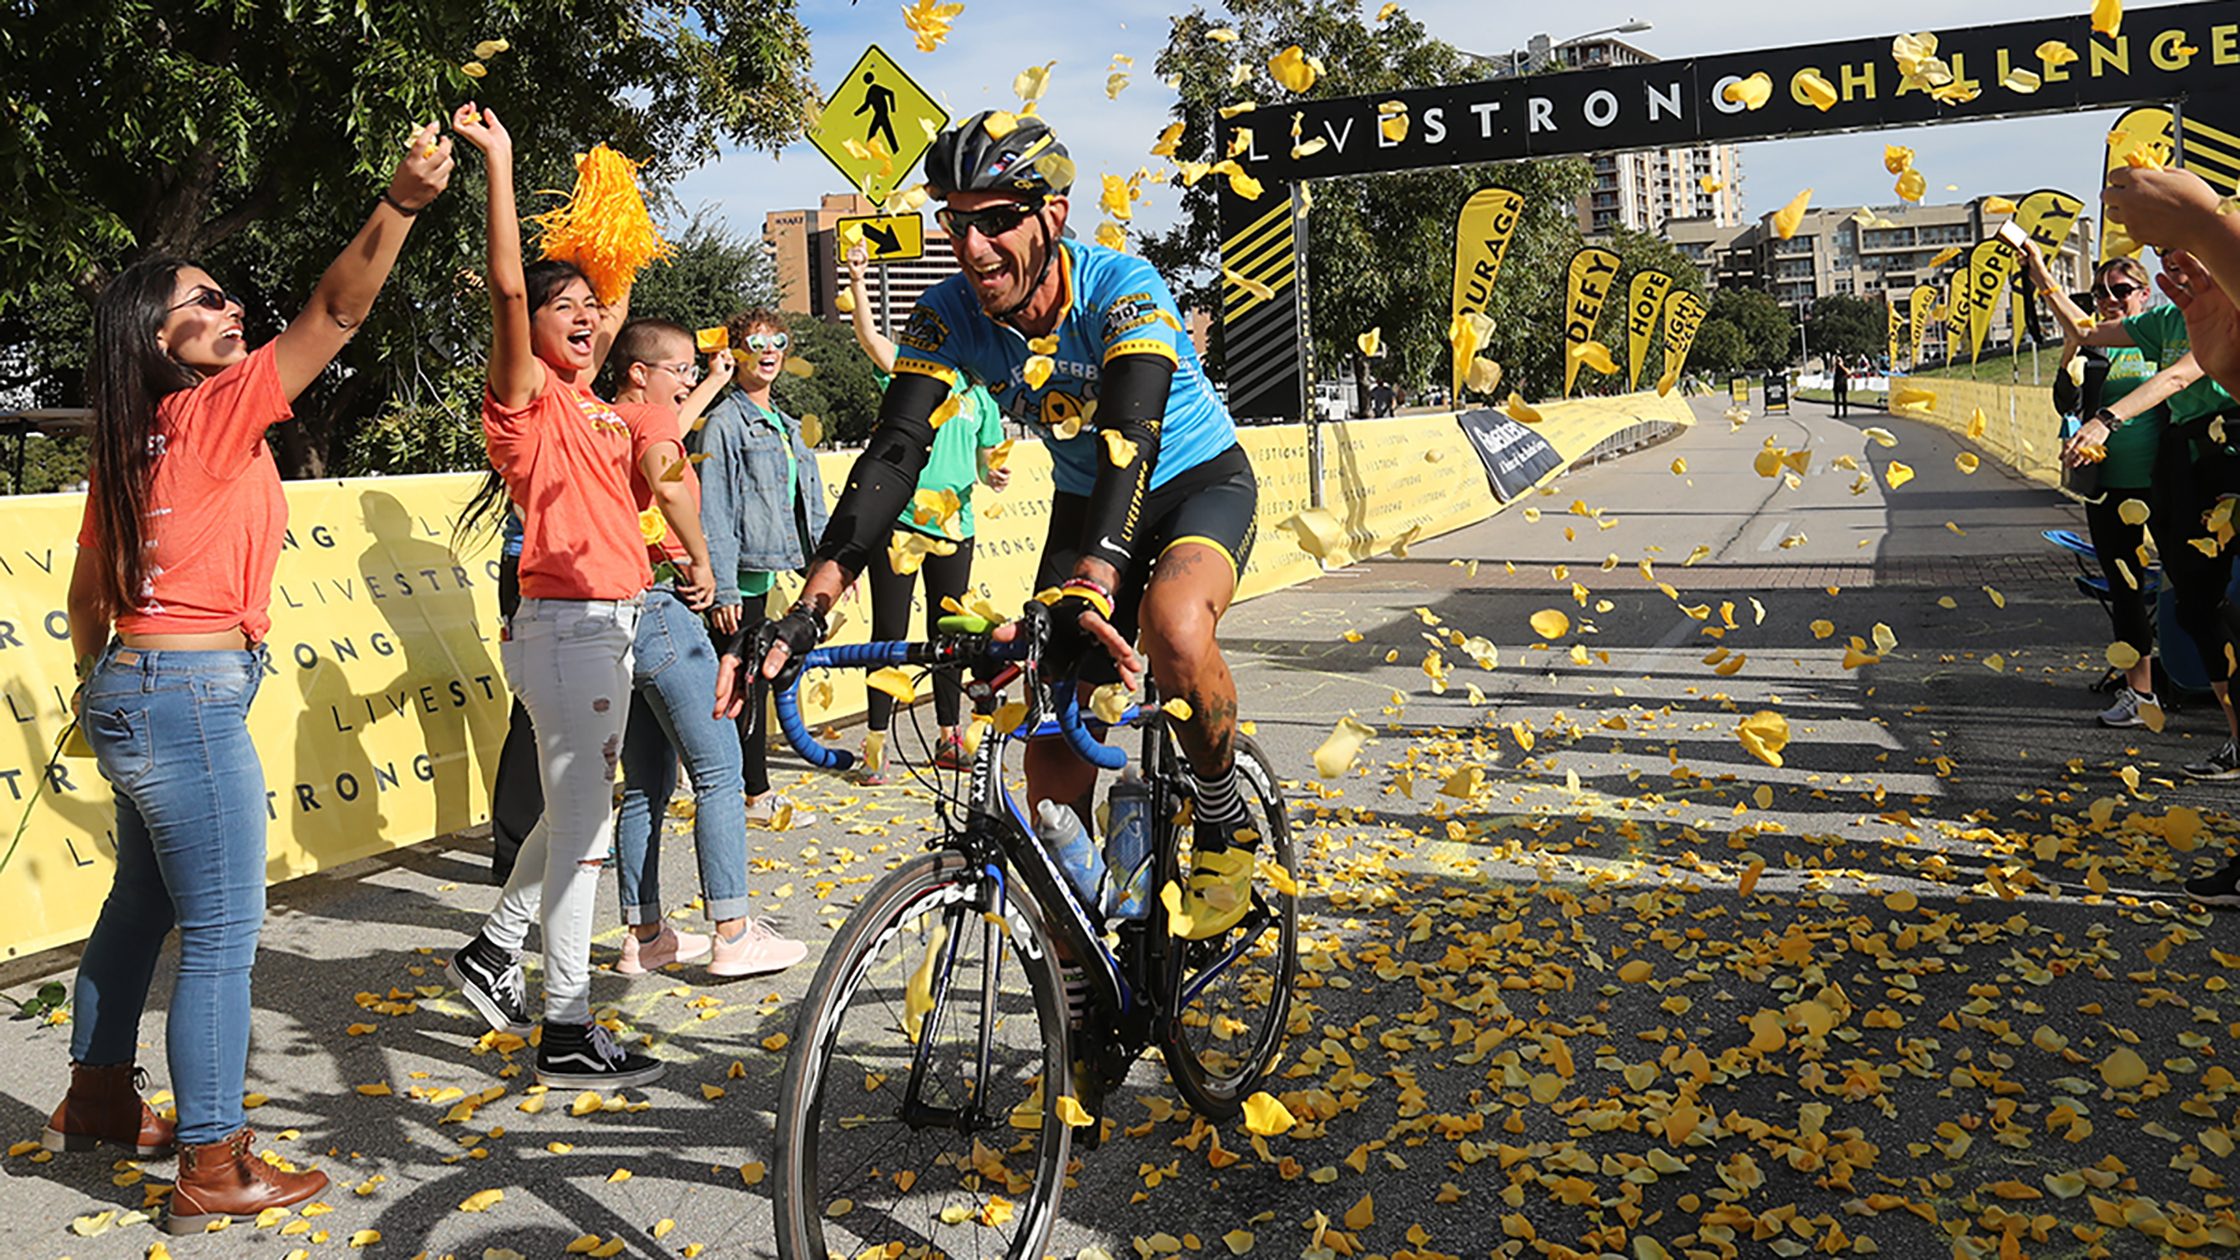 Man on bike crossing finish line of race while onlookers cheer and throw yellow rose petals